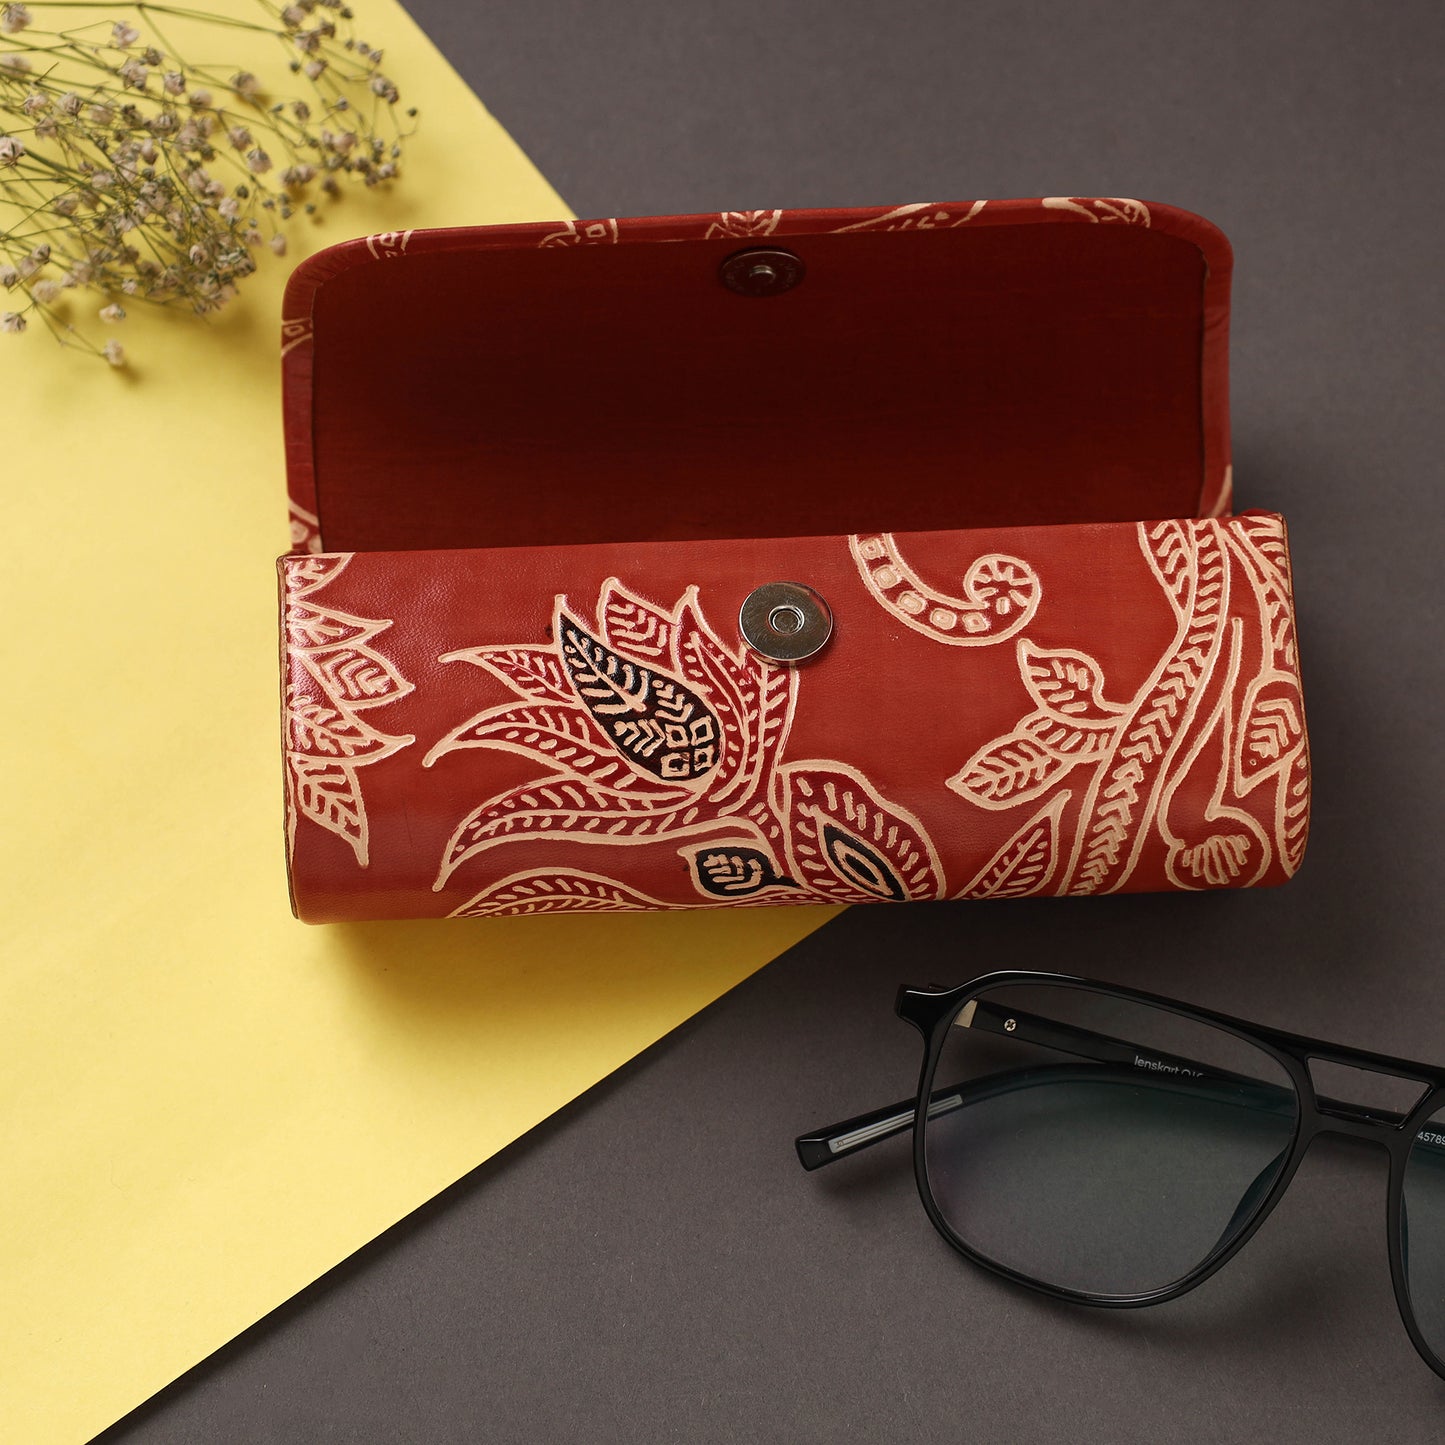 Handcrafted Embossed Leather Spectacle Case